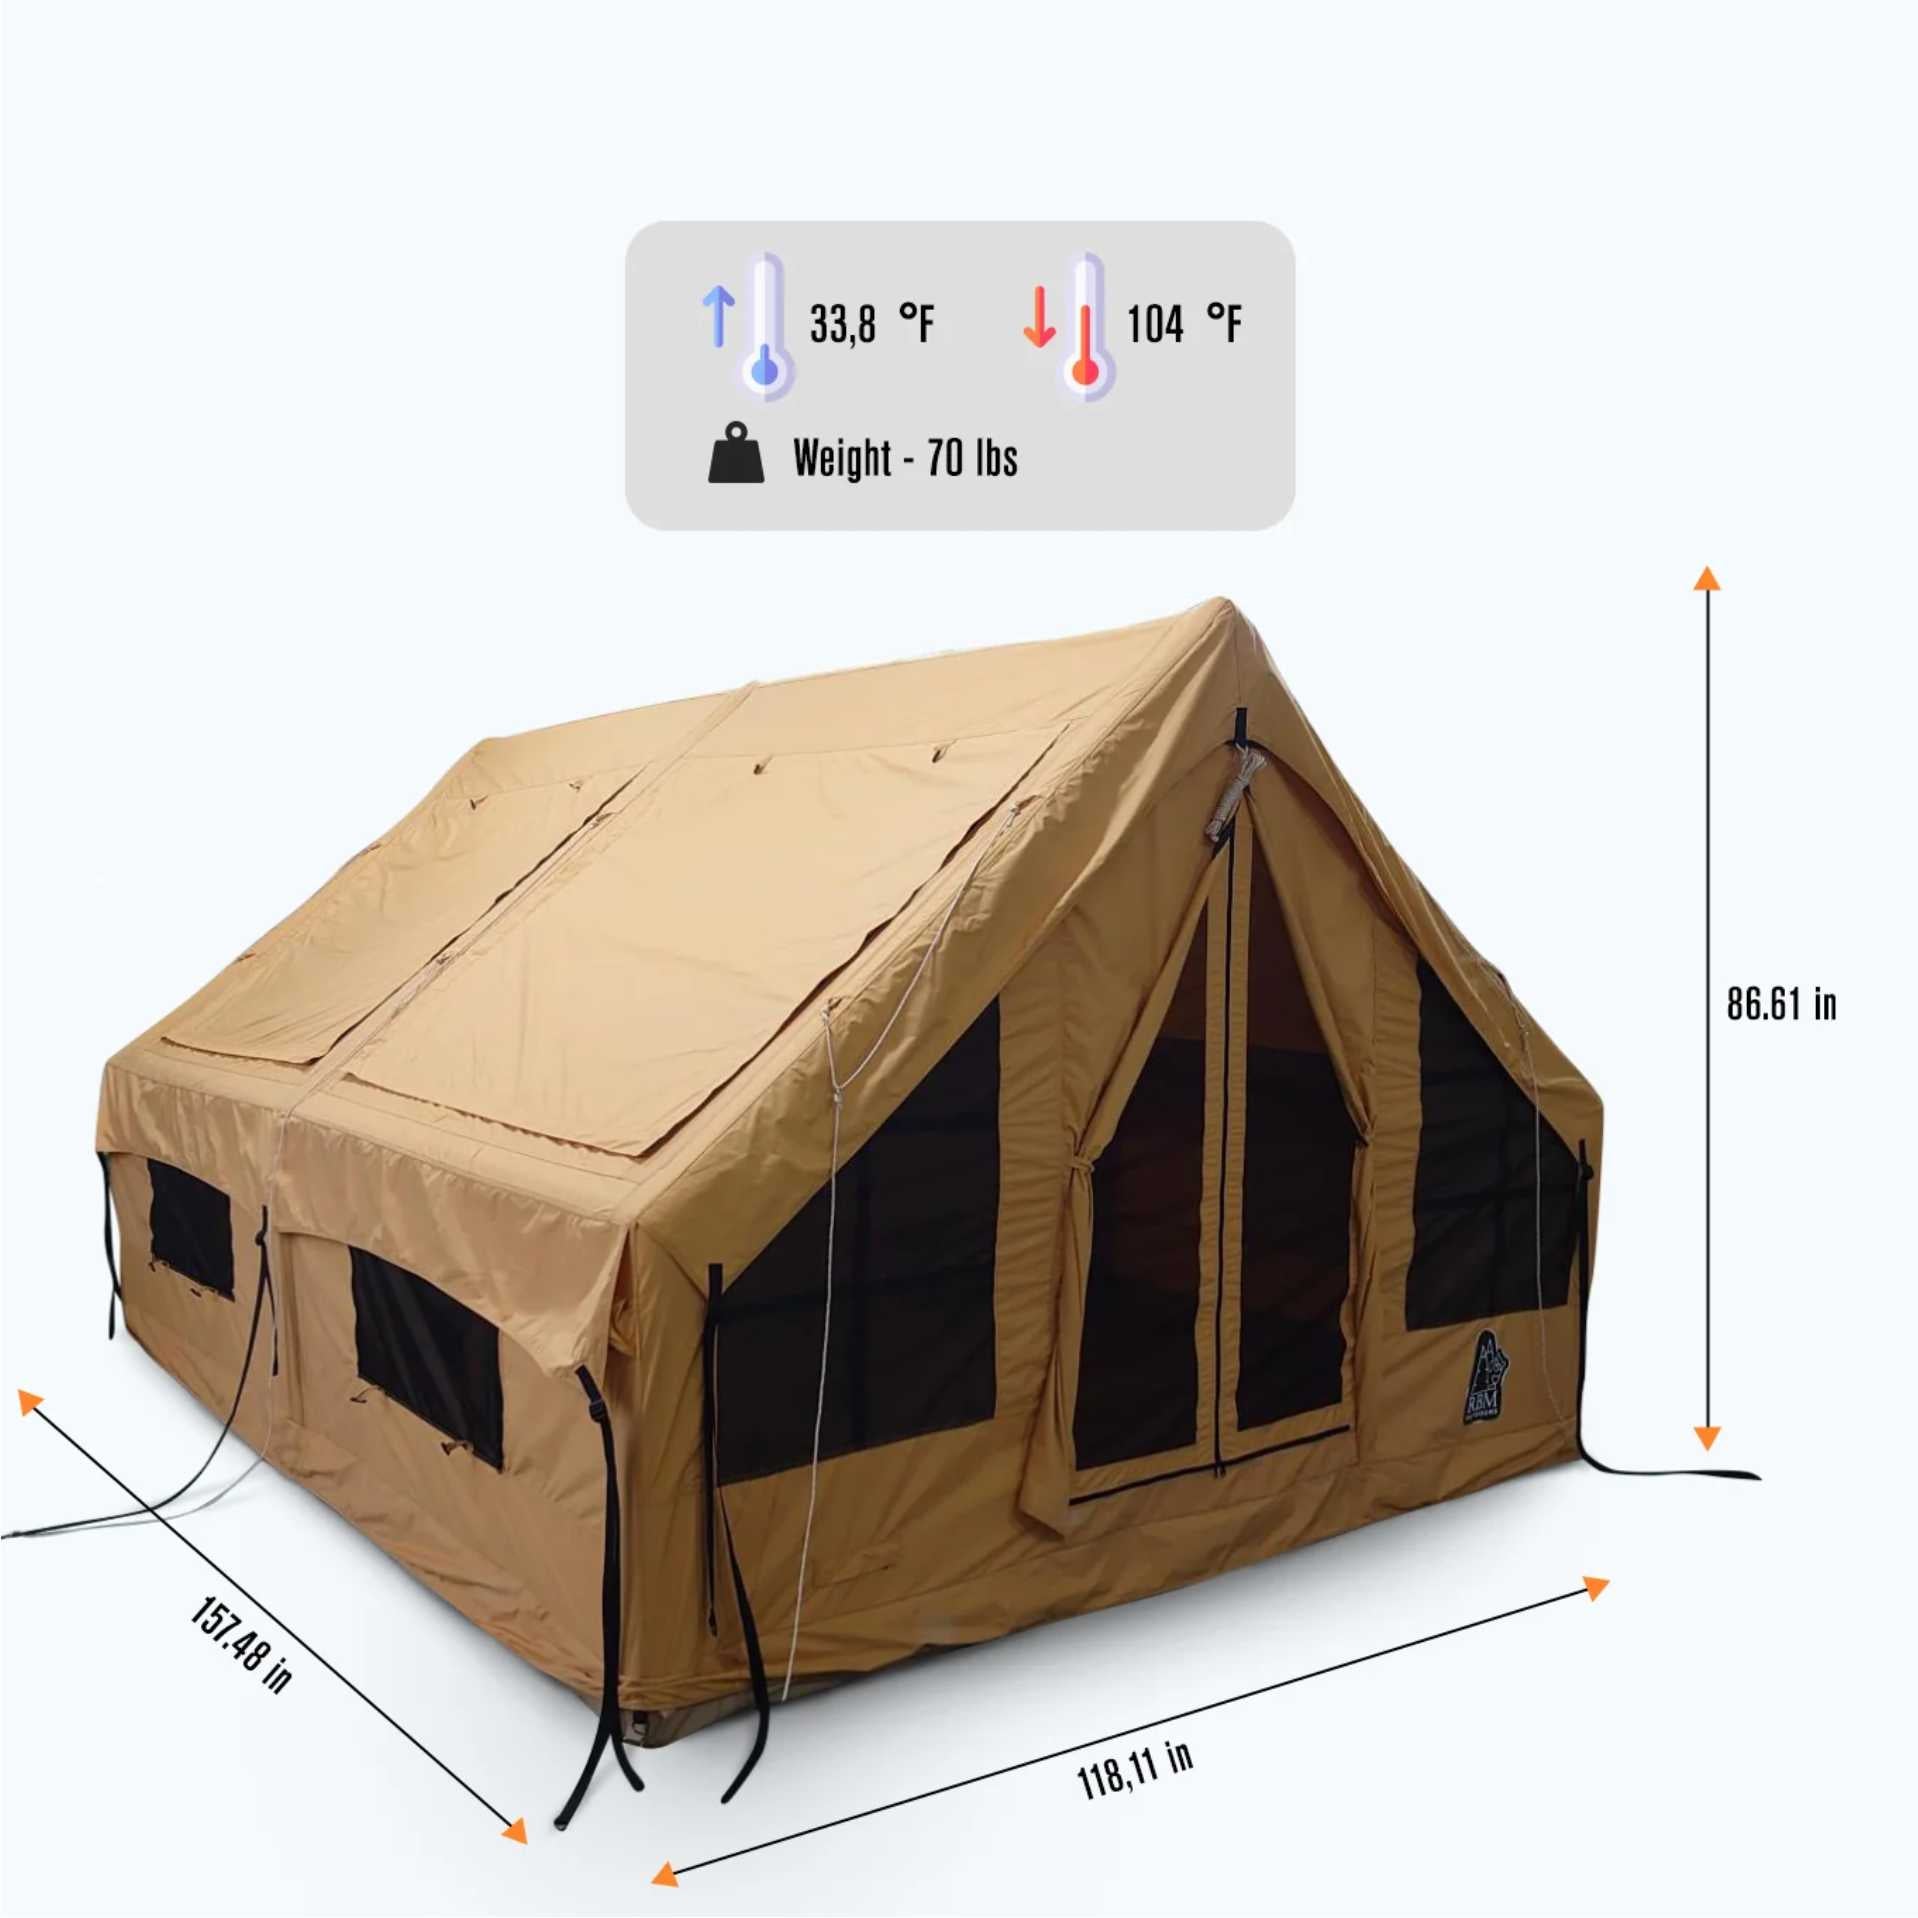 Premium Inflatable Tent with Stove Jack Panda air Large. Best for 1